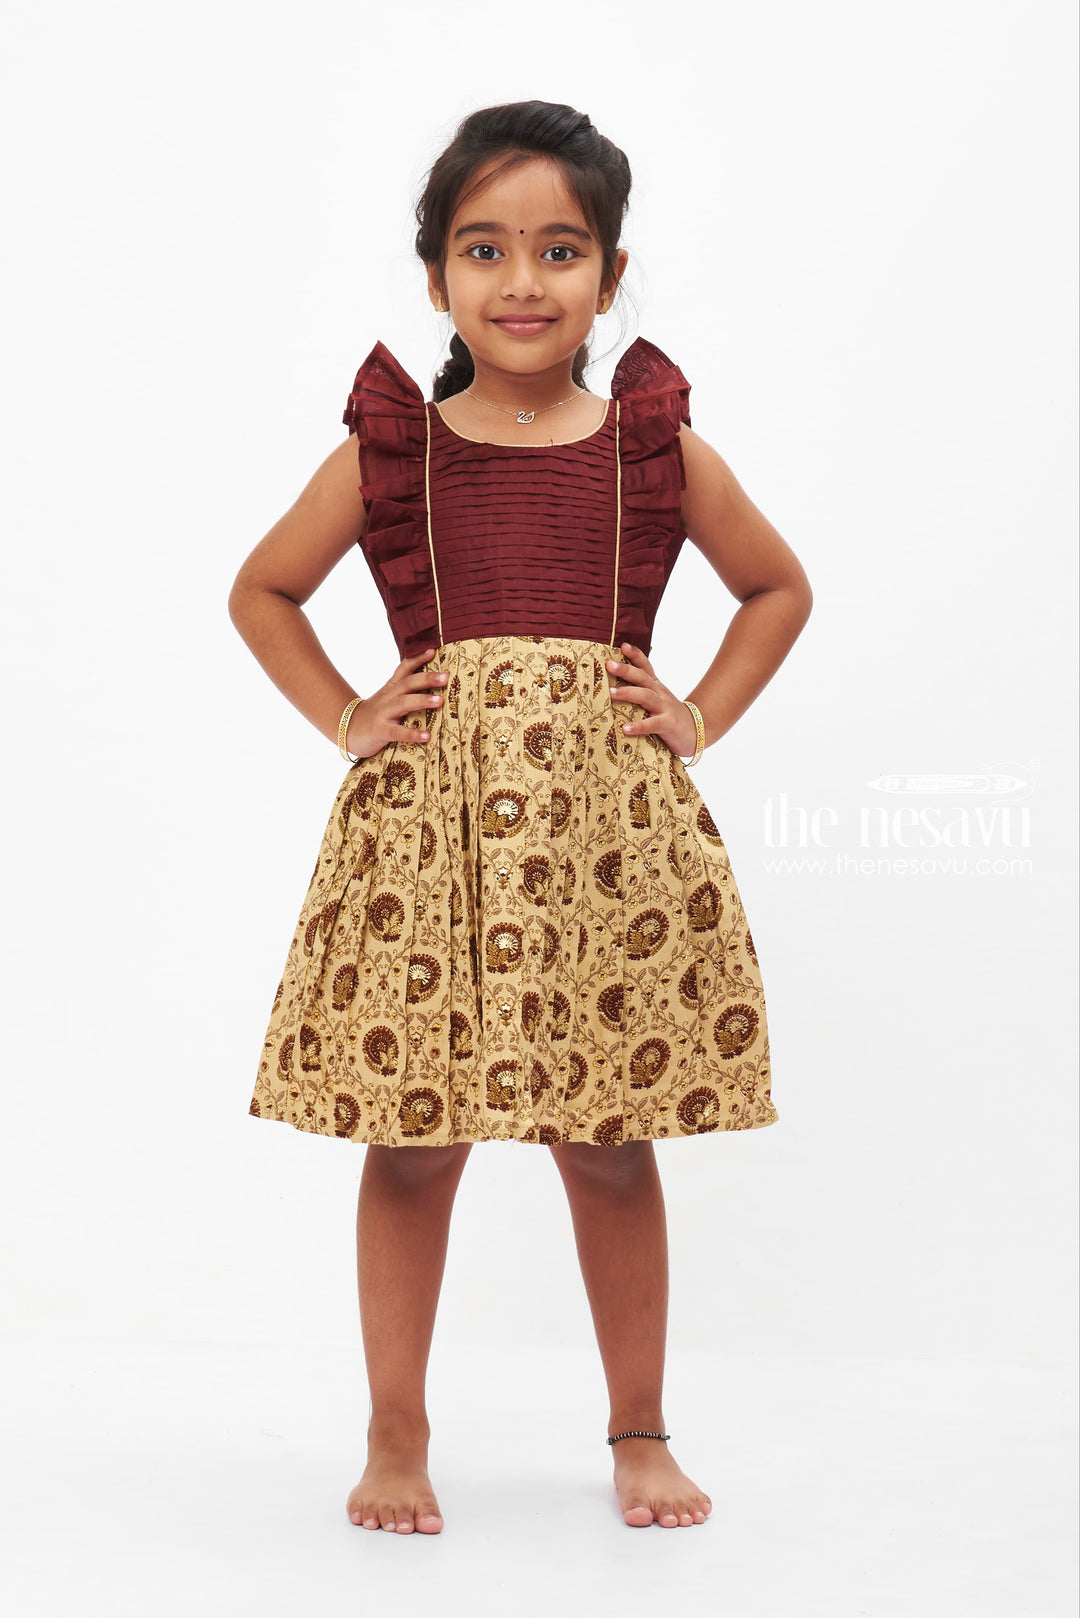 The Nesavu Baby Cotton Frocks Brown Elegance Ruffled Frock with Beige Paisley Print for Babies Nesavu 16 (1Y) / Brown BFJ510D-16 Baby's Brown Cotton Frock with Paisley Print | Little Girls Traditional | The Nesavu